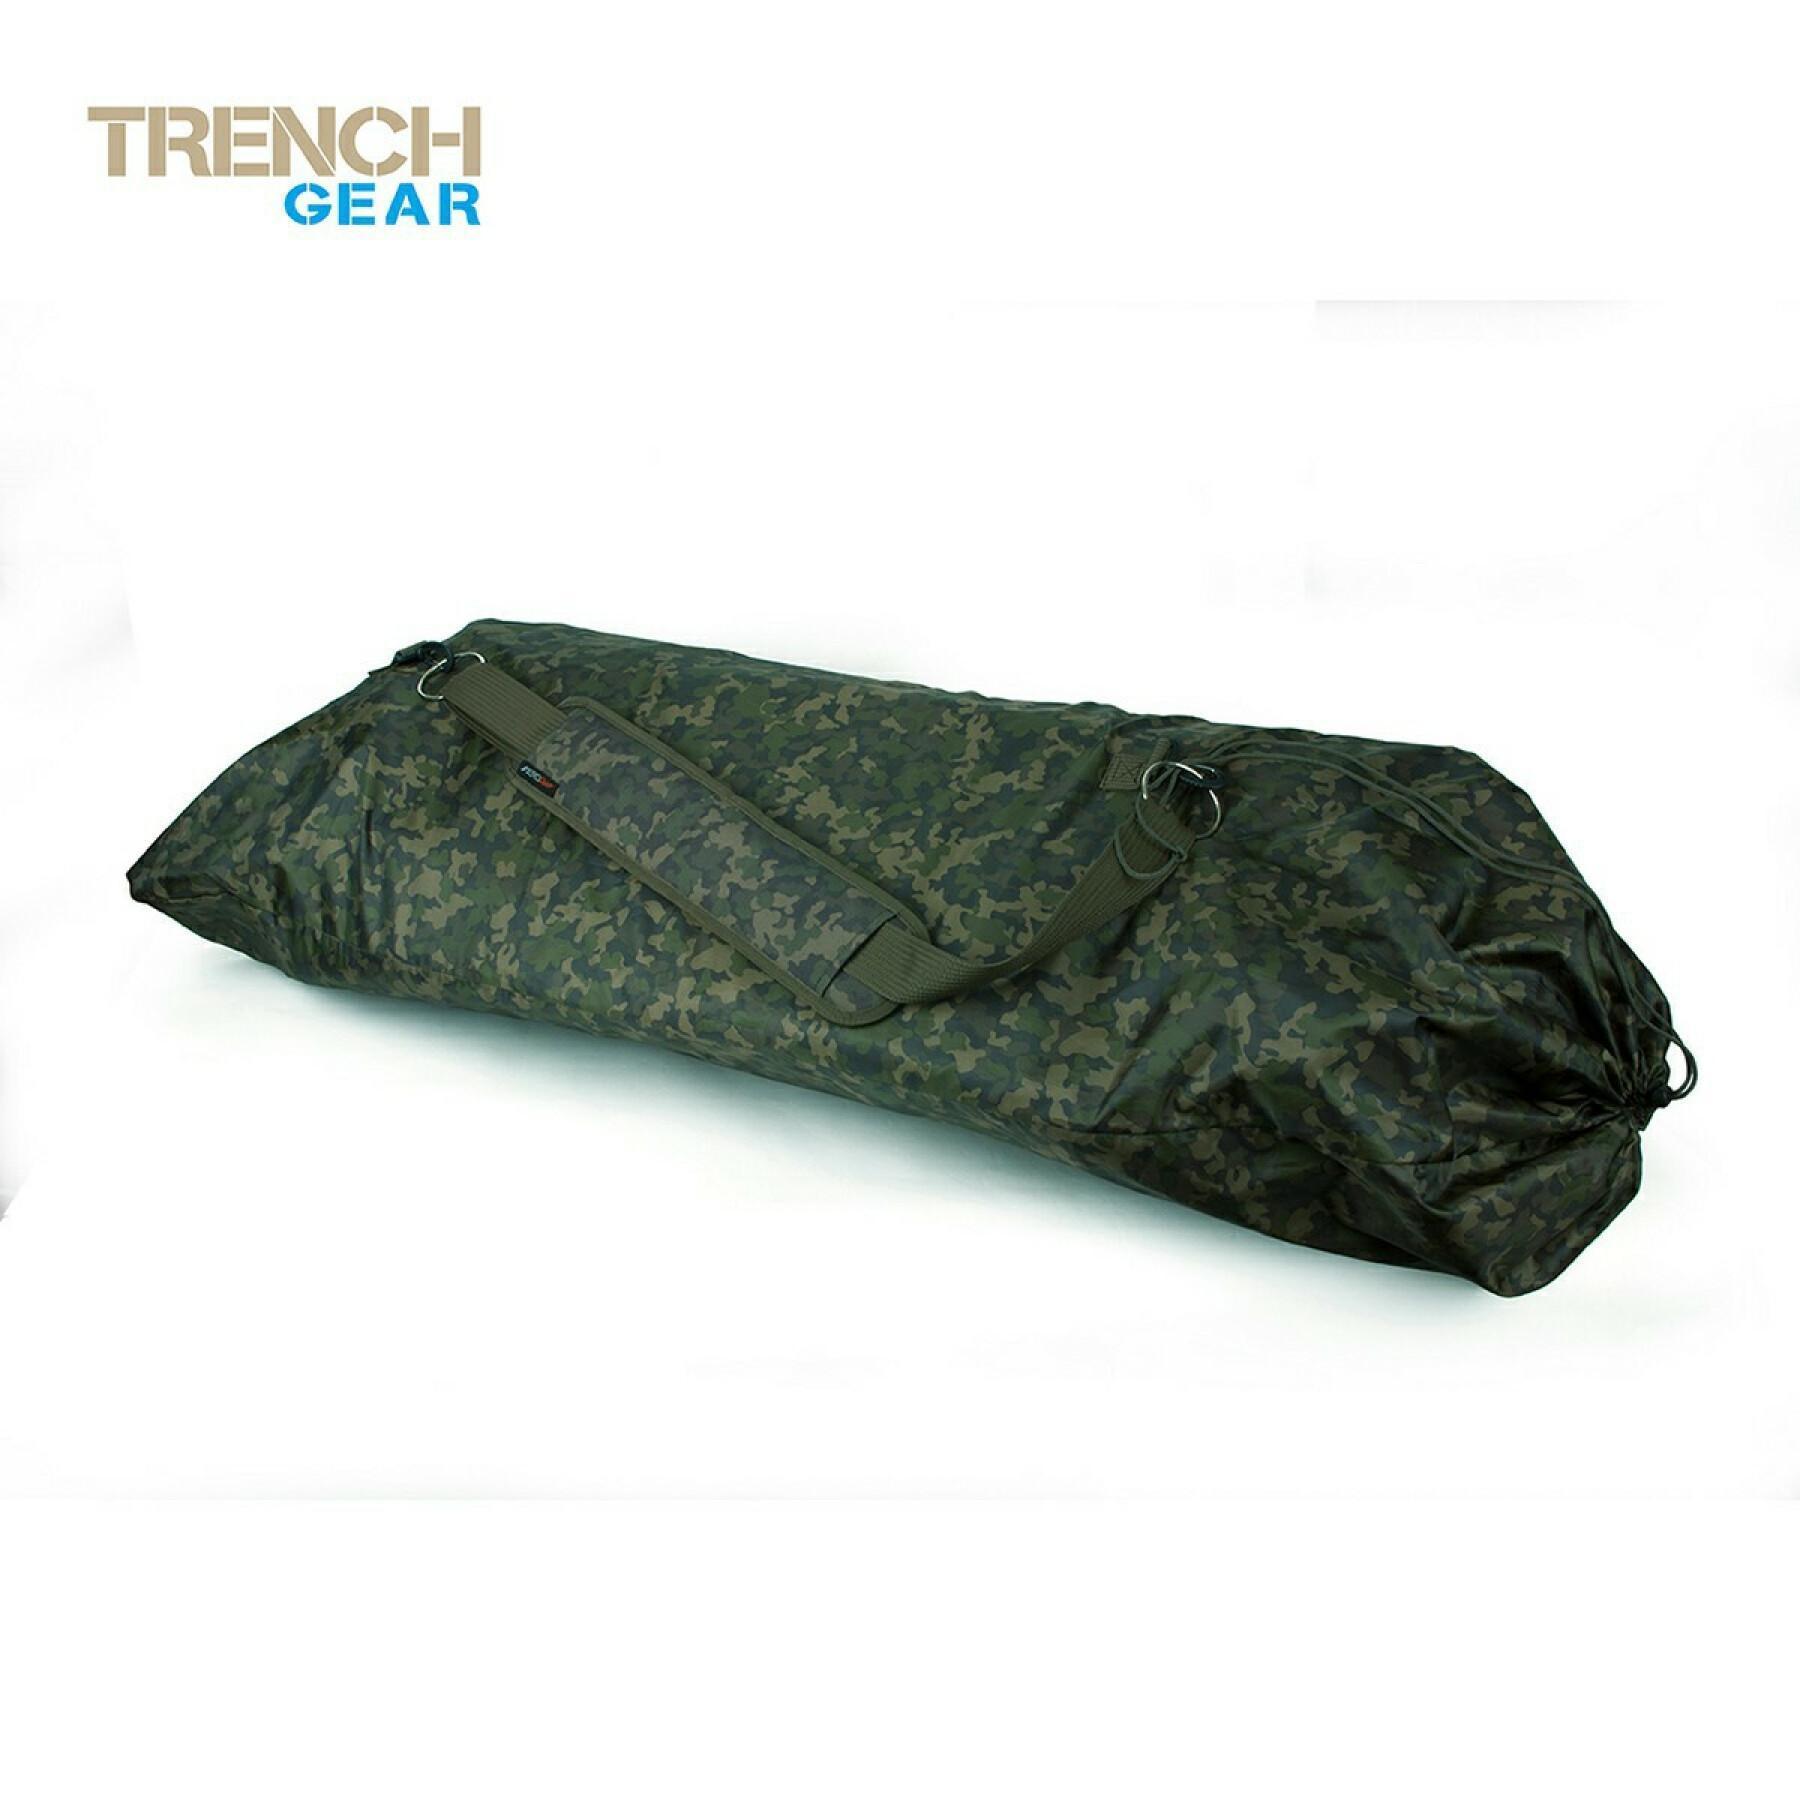 Tapis de réception Shimano Trench Euro Protection